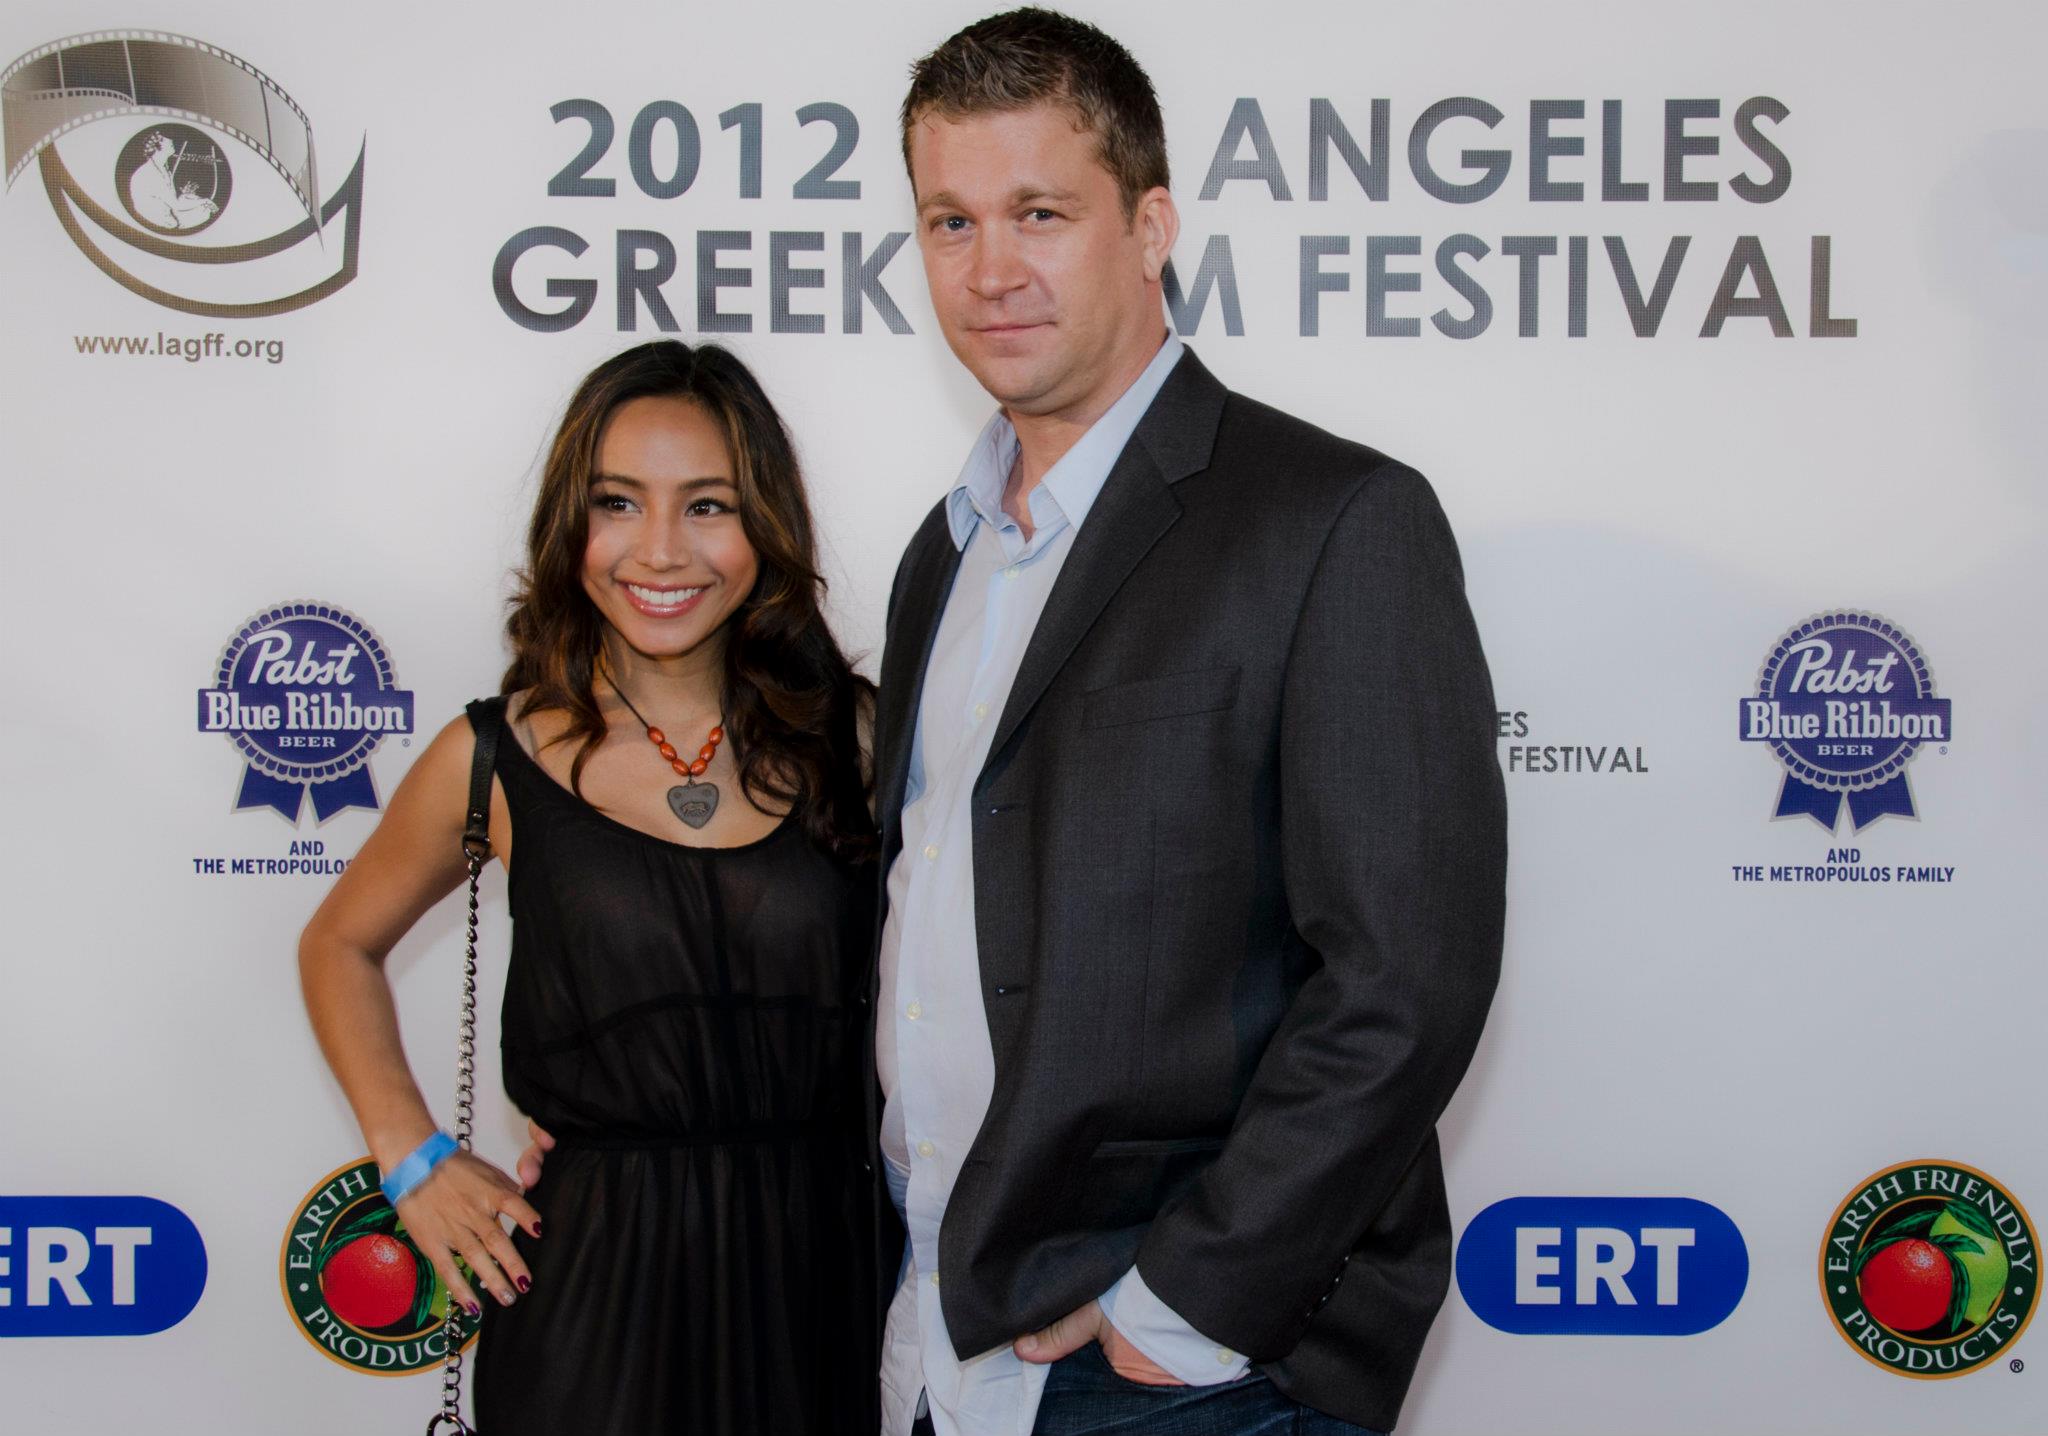 LA GREEK FESTIVAL 2012 for A GREEN STORY with Producer Chadwick Struck.